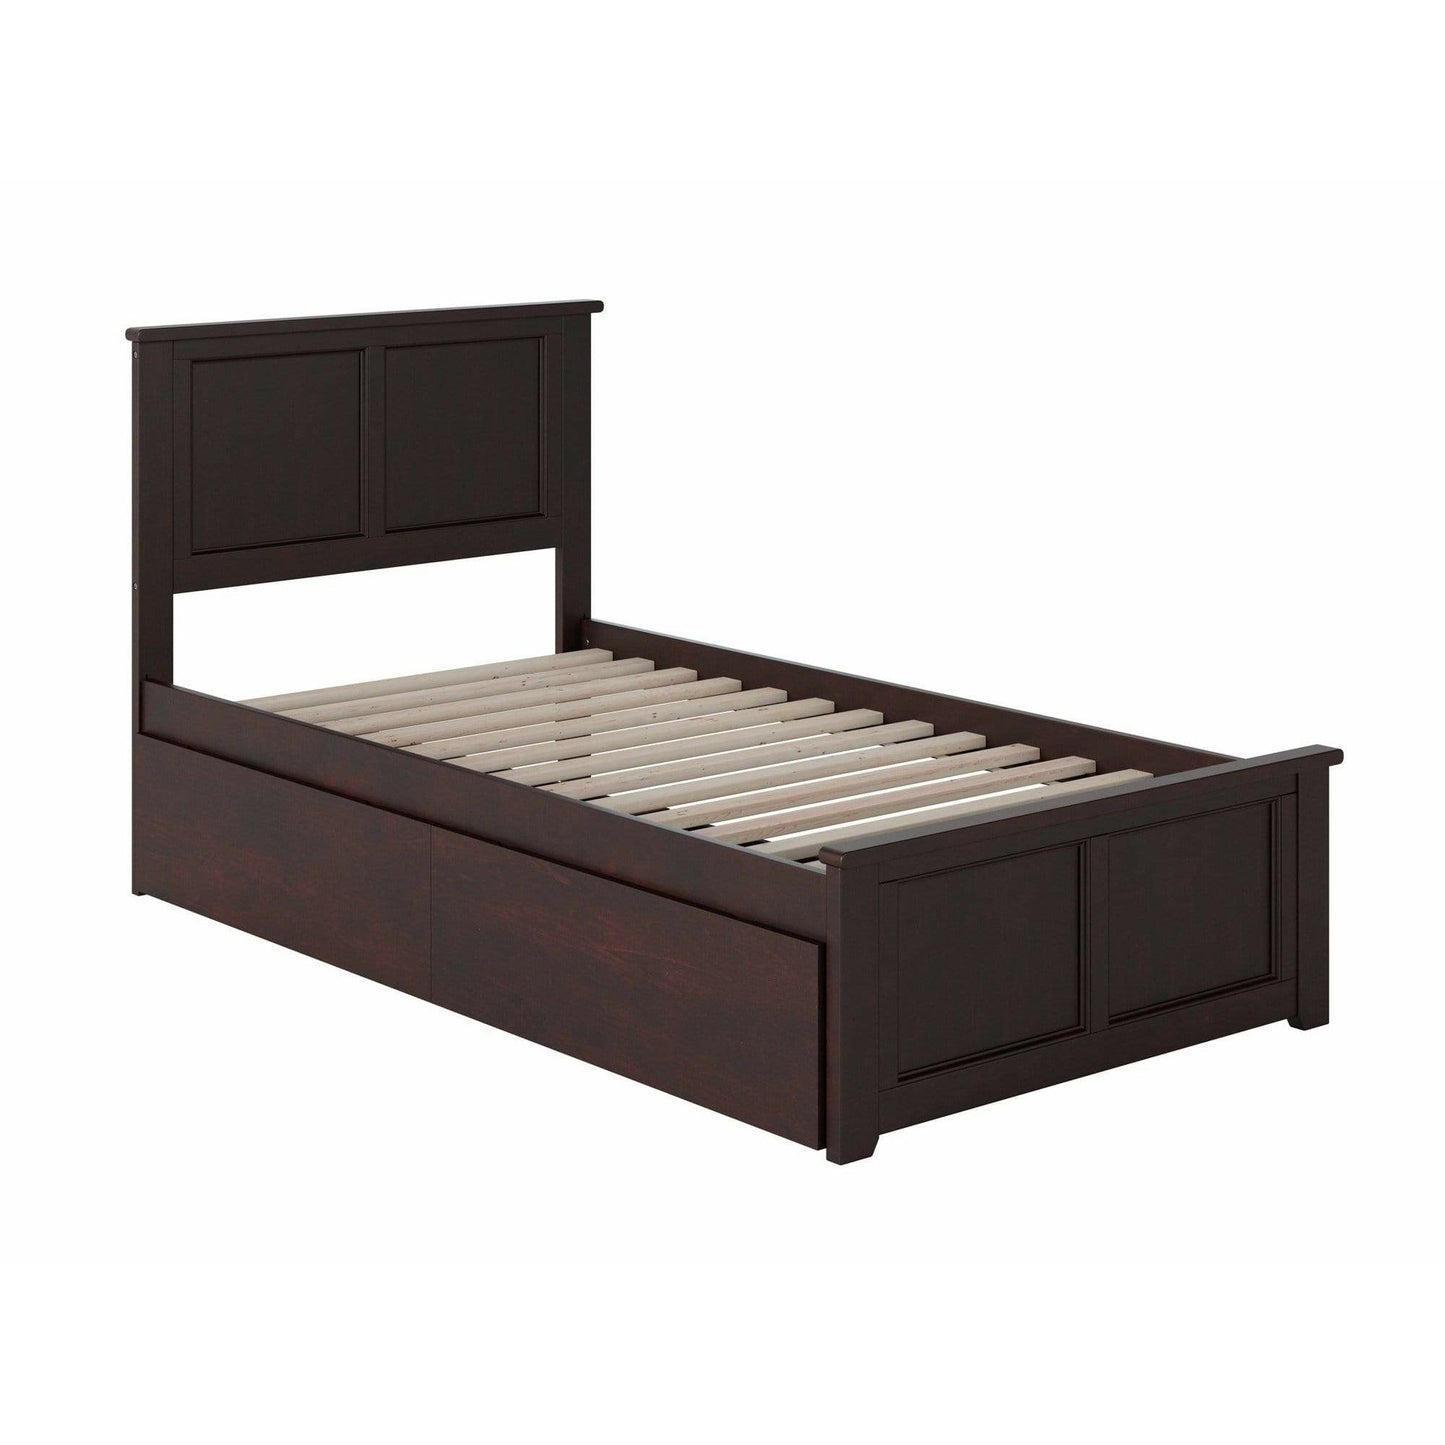 Atlantic Furniture Bed Madison Twin Platform Bed with Matching Foot Board with 2 Urban Bed Drawers in Espresso